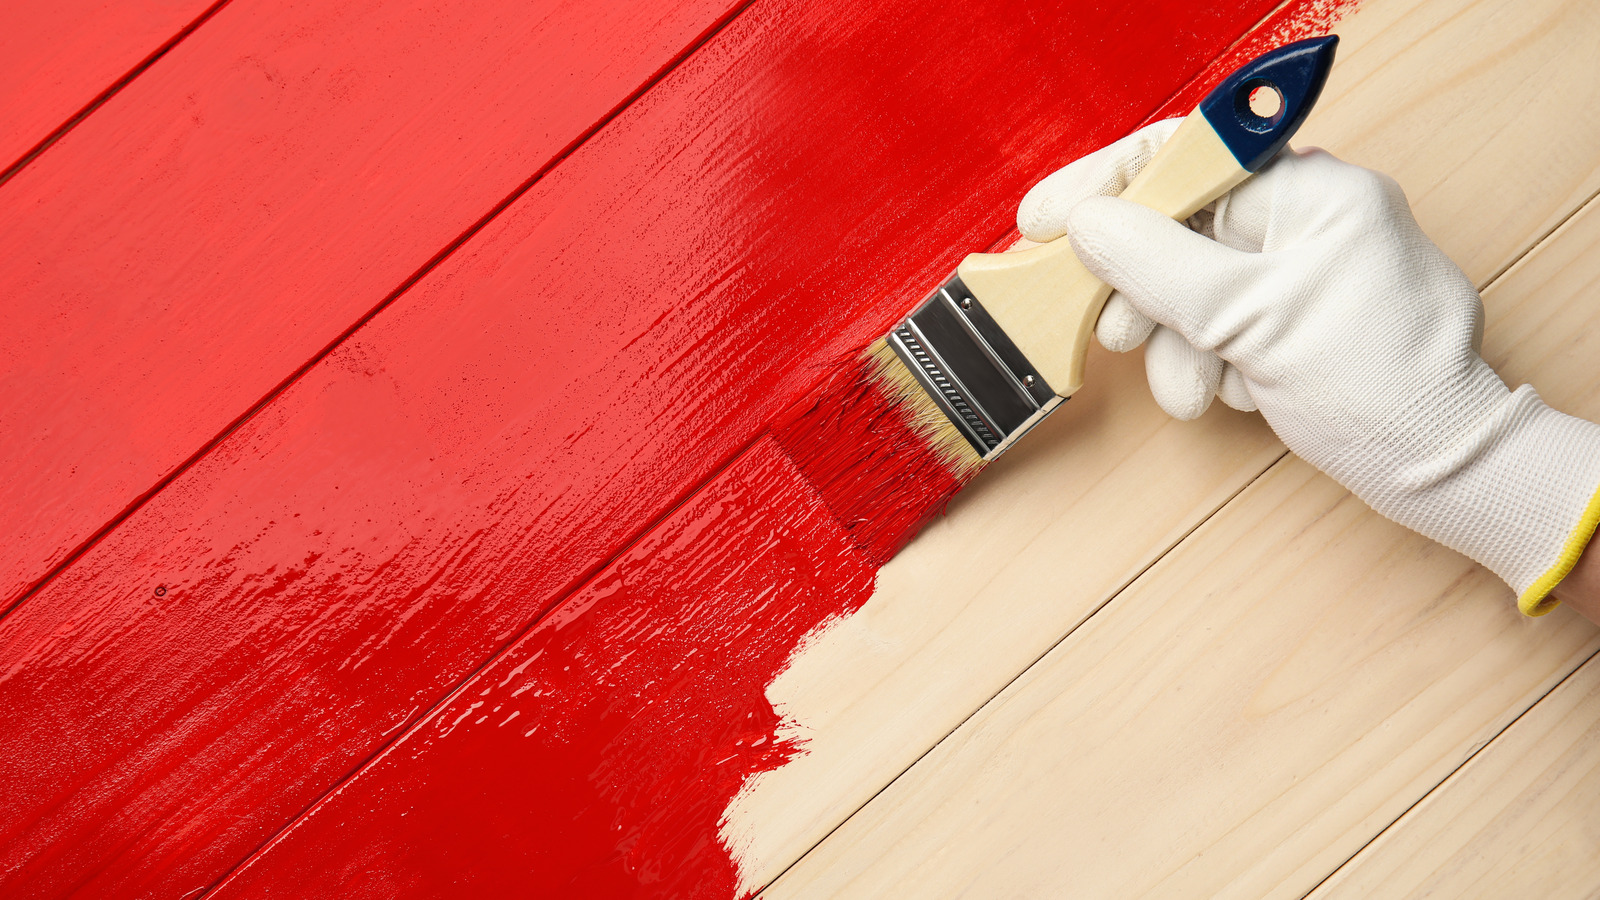 What Paint Finish Should You Use On Wood Floors?